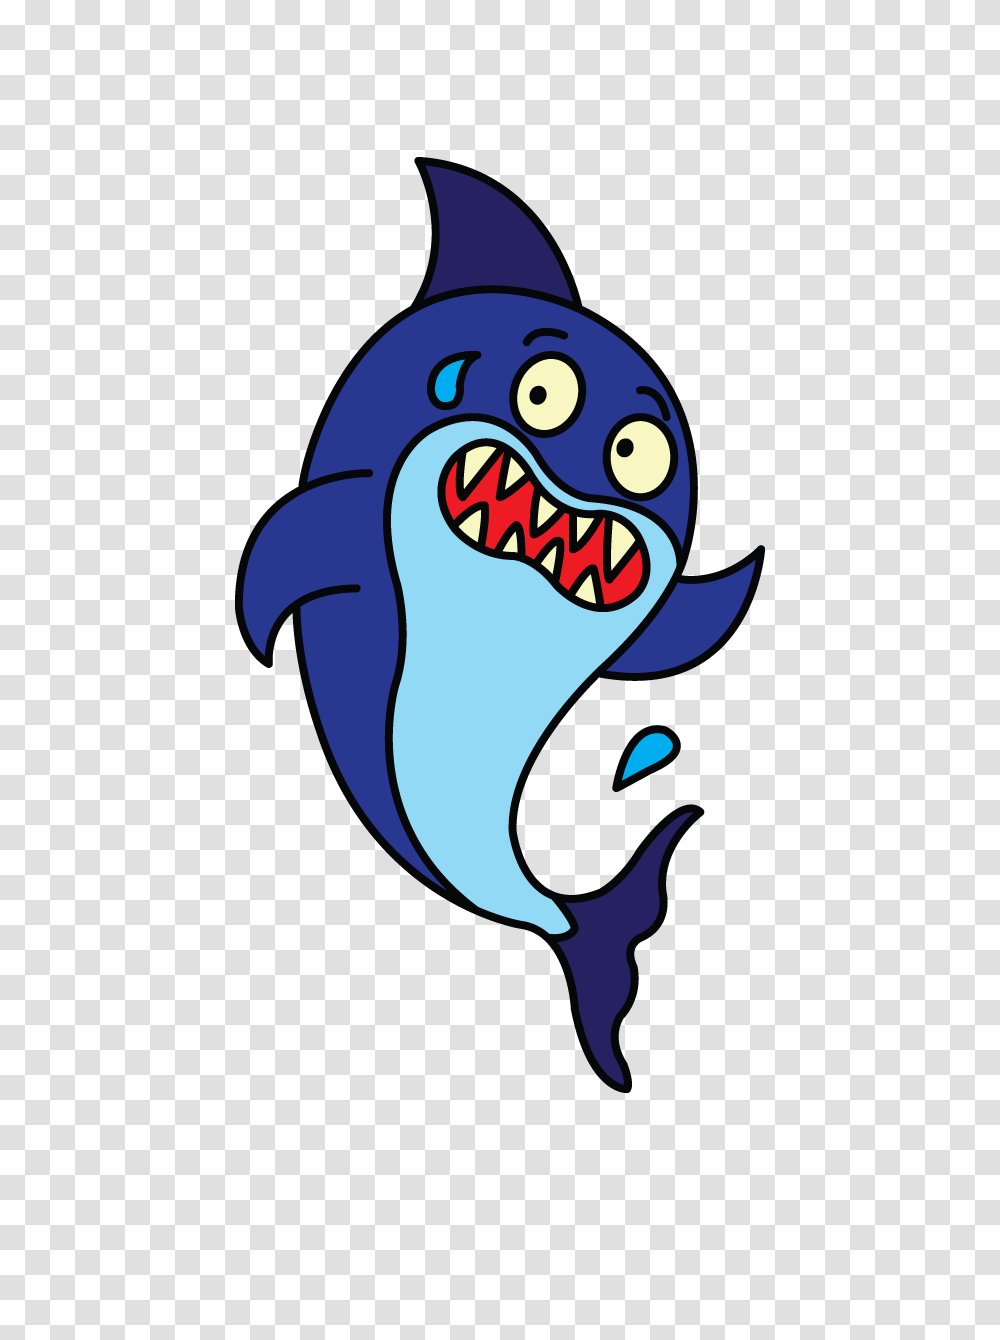 How To Draw A Baby Shark Easy Step, Label, Teeth Transparent Png